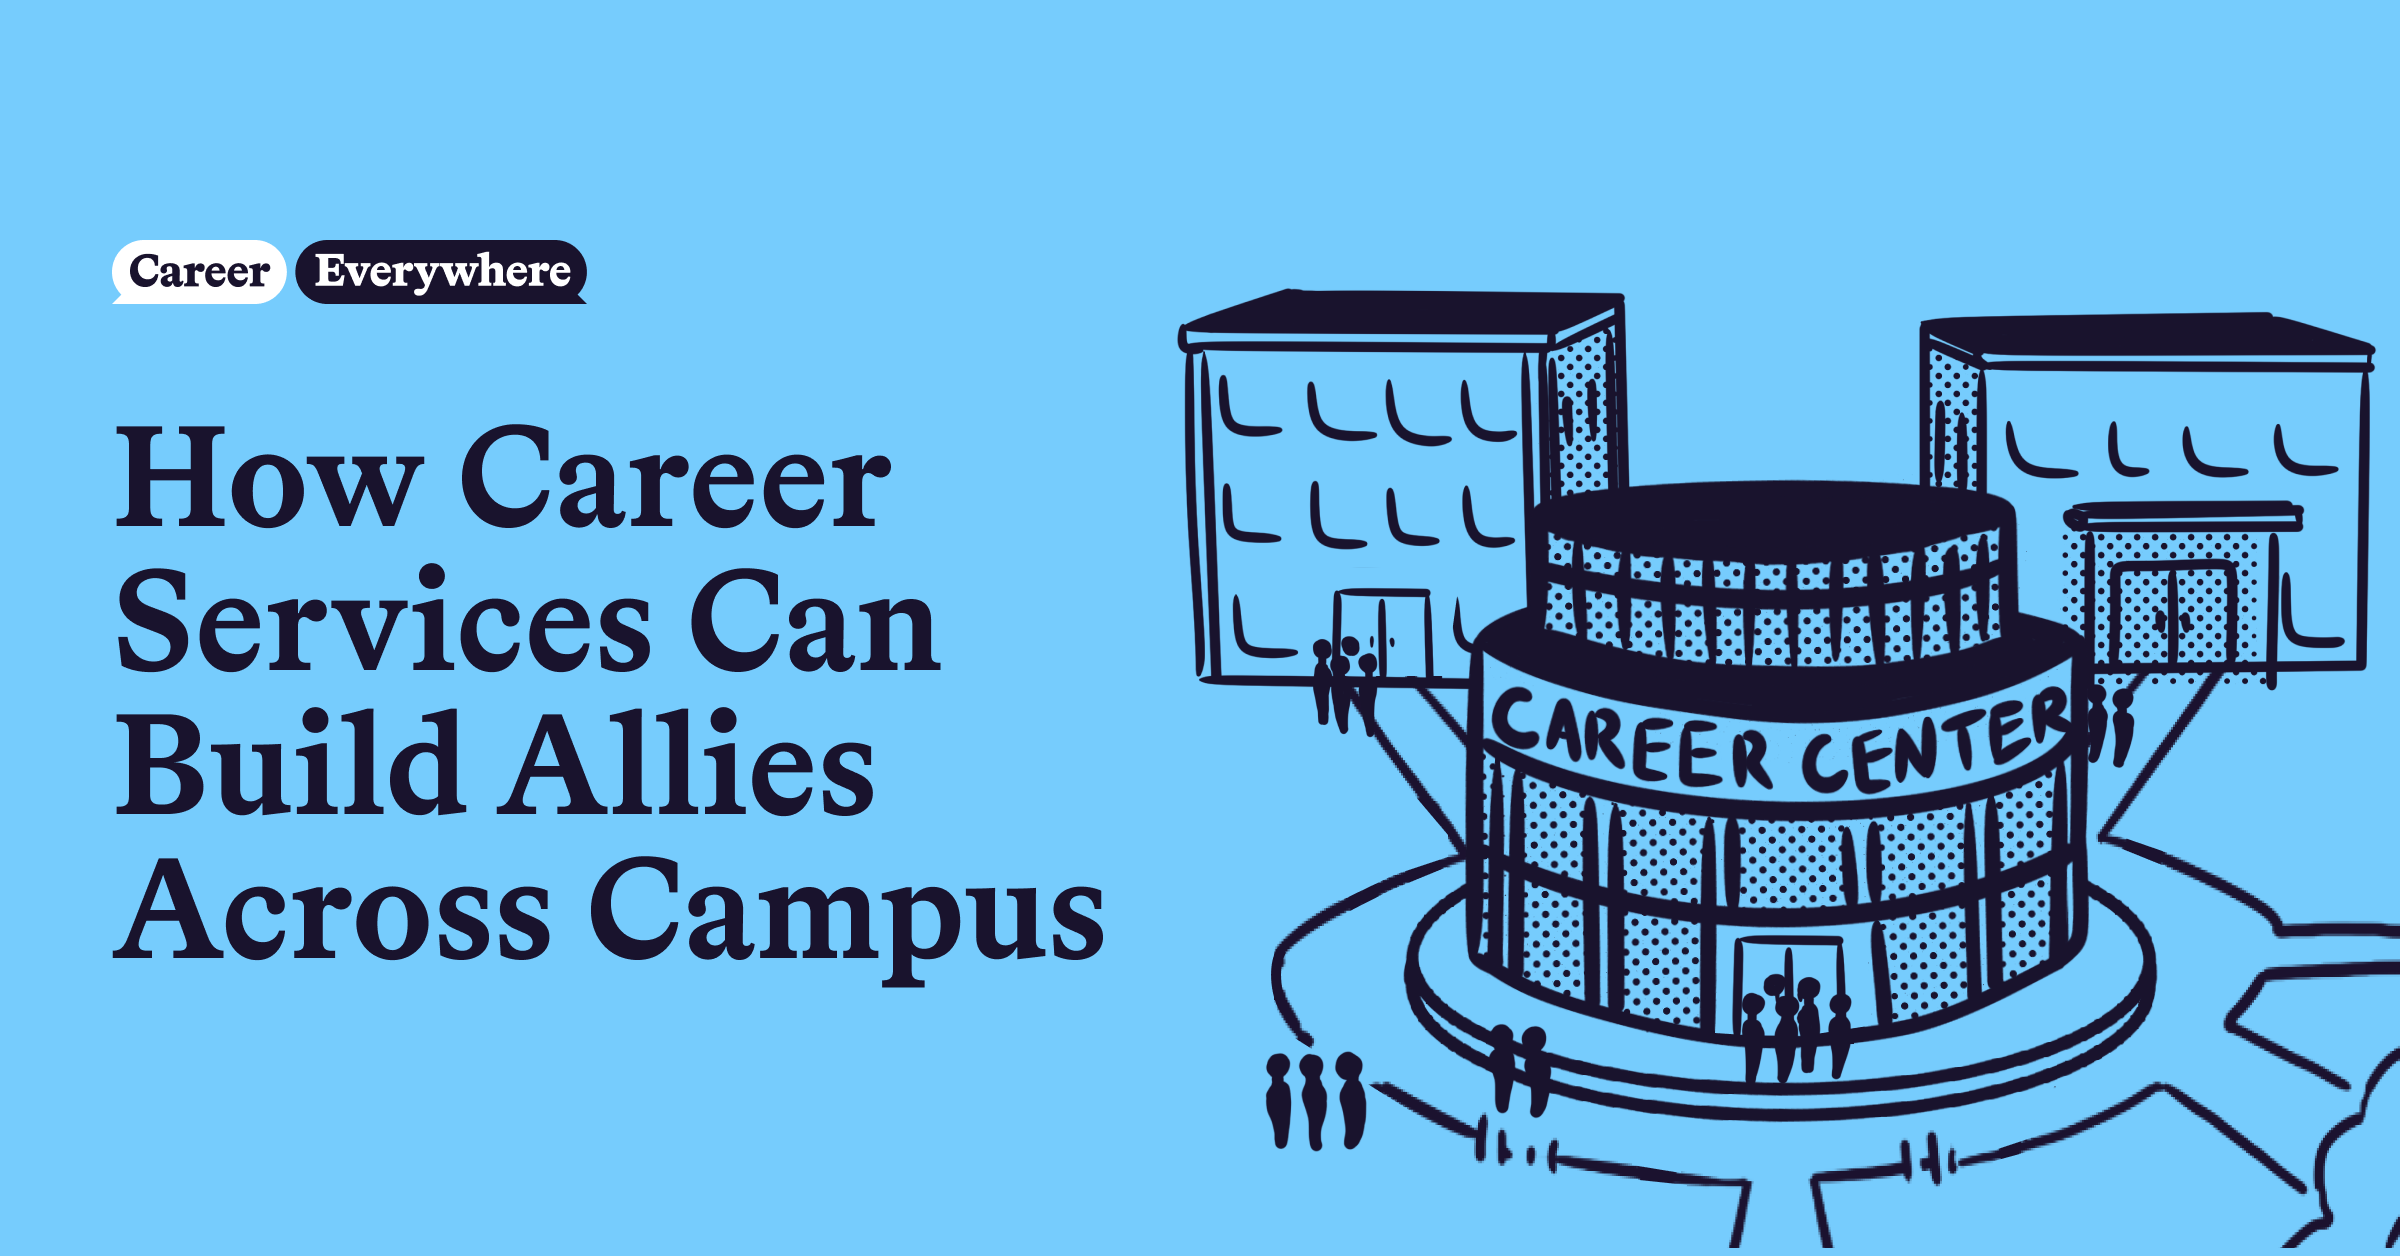 How Career Services Can Build Allies Across Campus